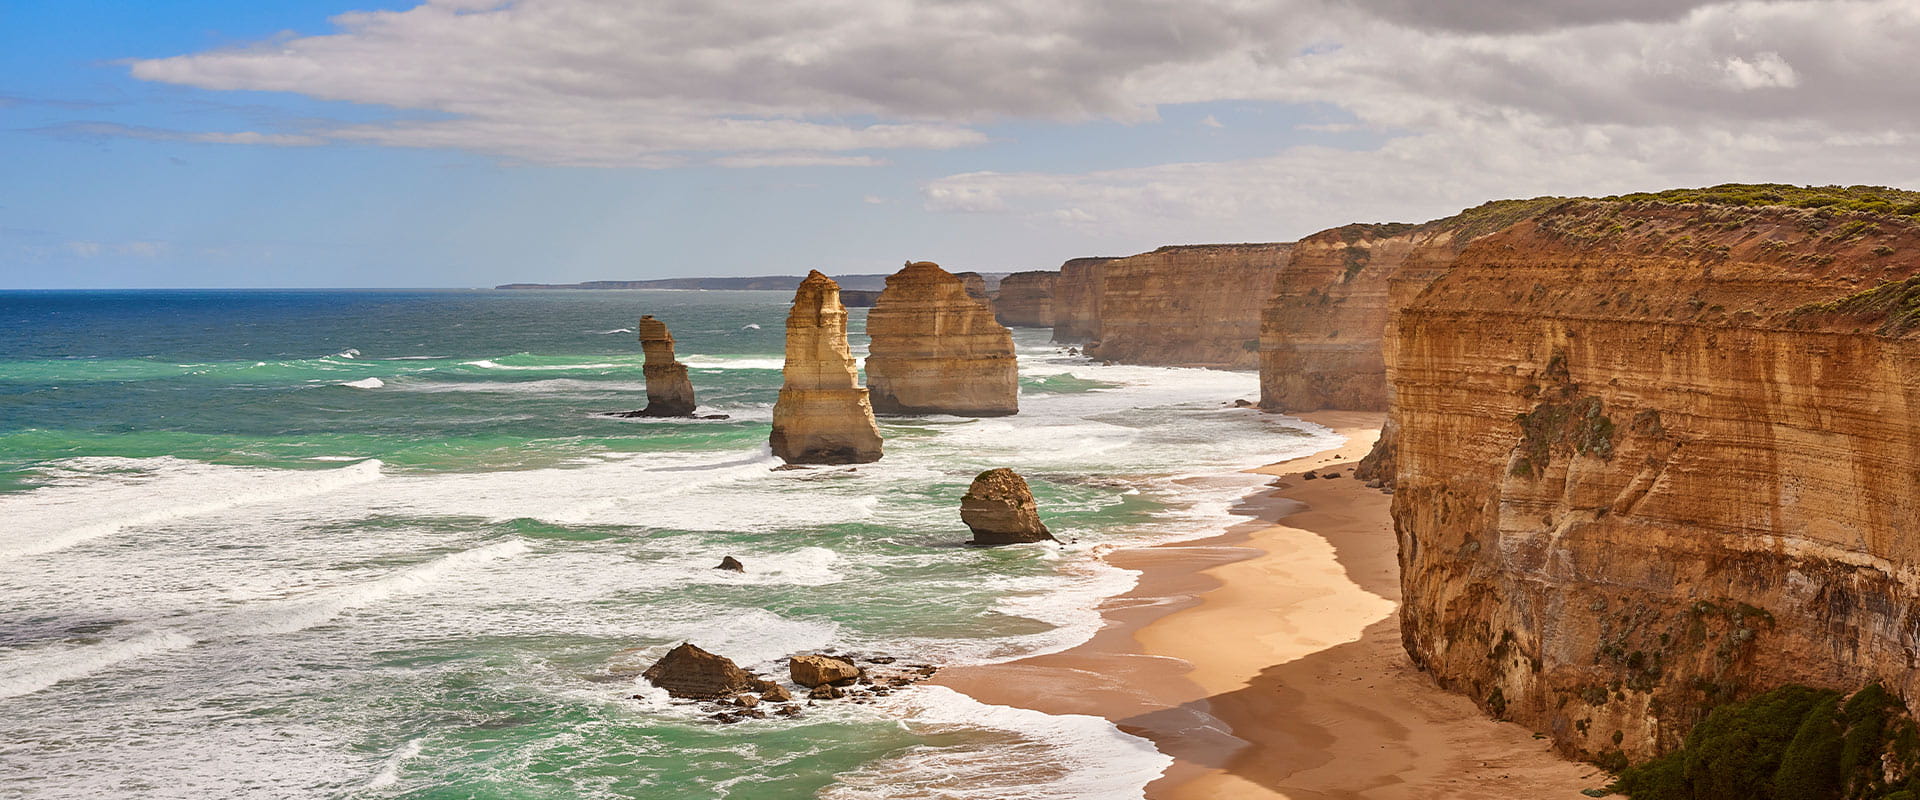 Four large rock stacks stand out of the surf next to tall orange sandstone cliffs above a sandy beach.